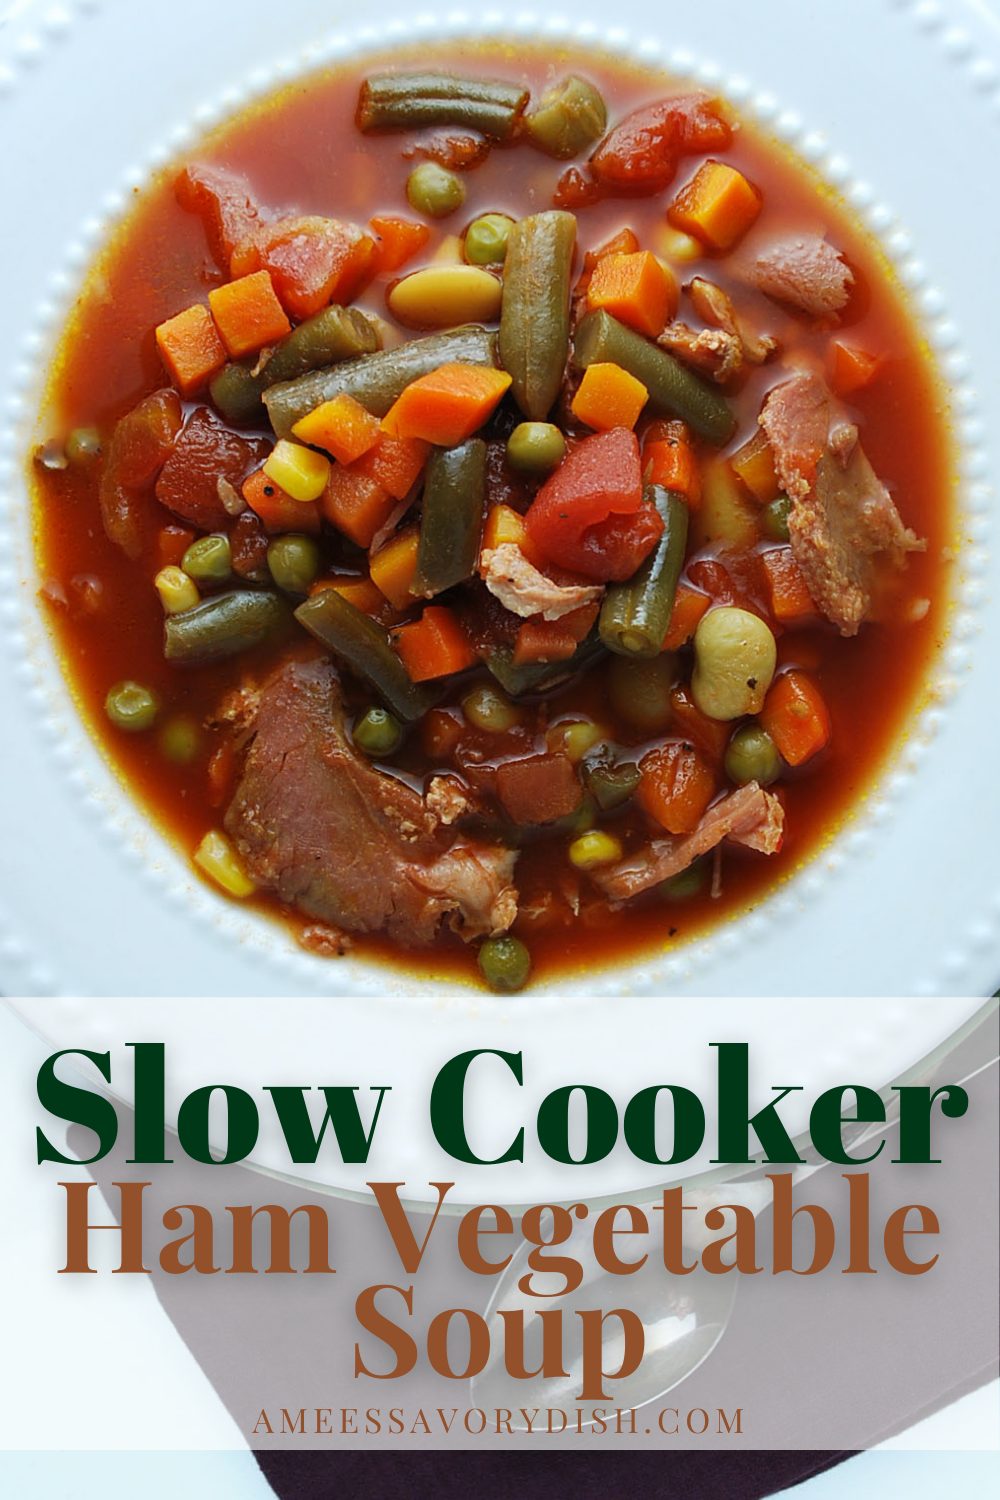 Slow Cooker Southern Ham Vegetable Soup recipe